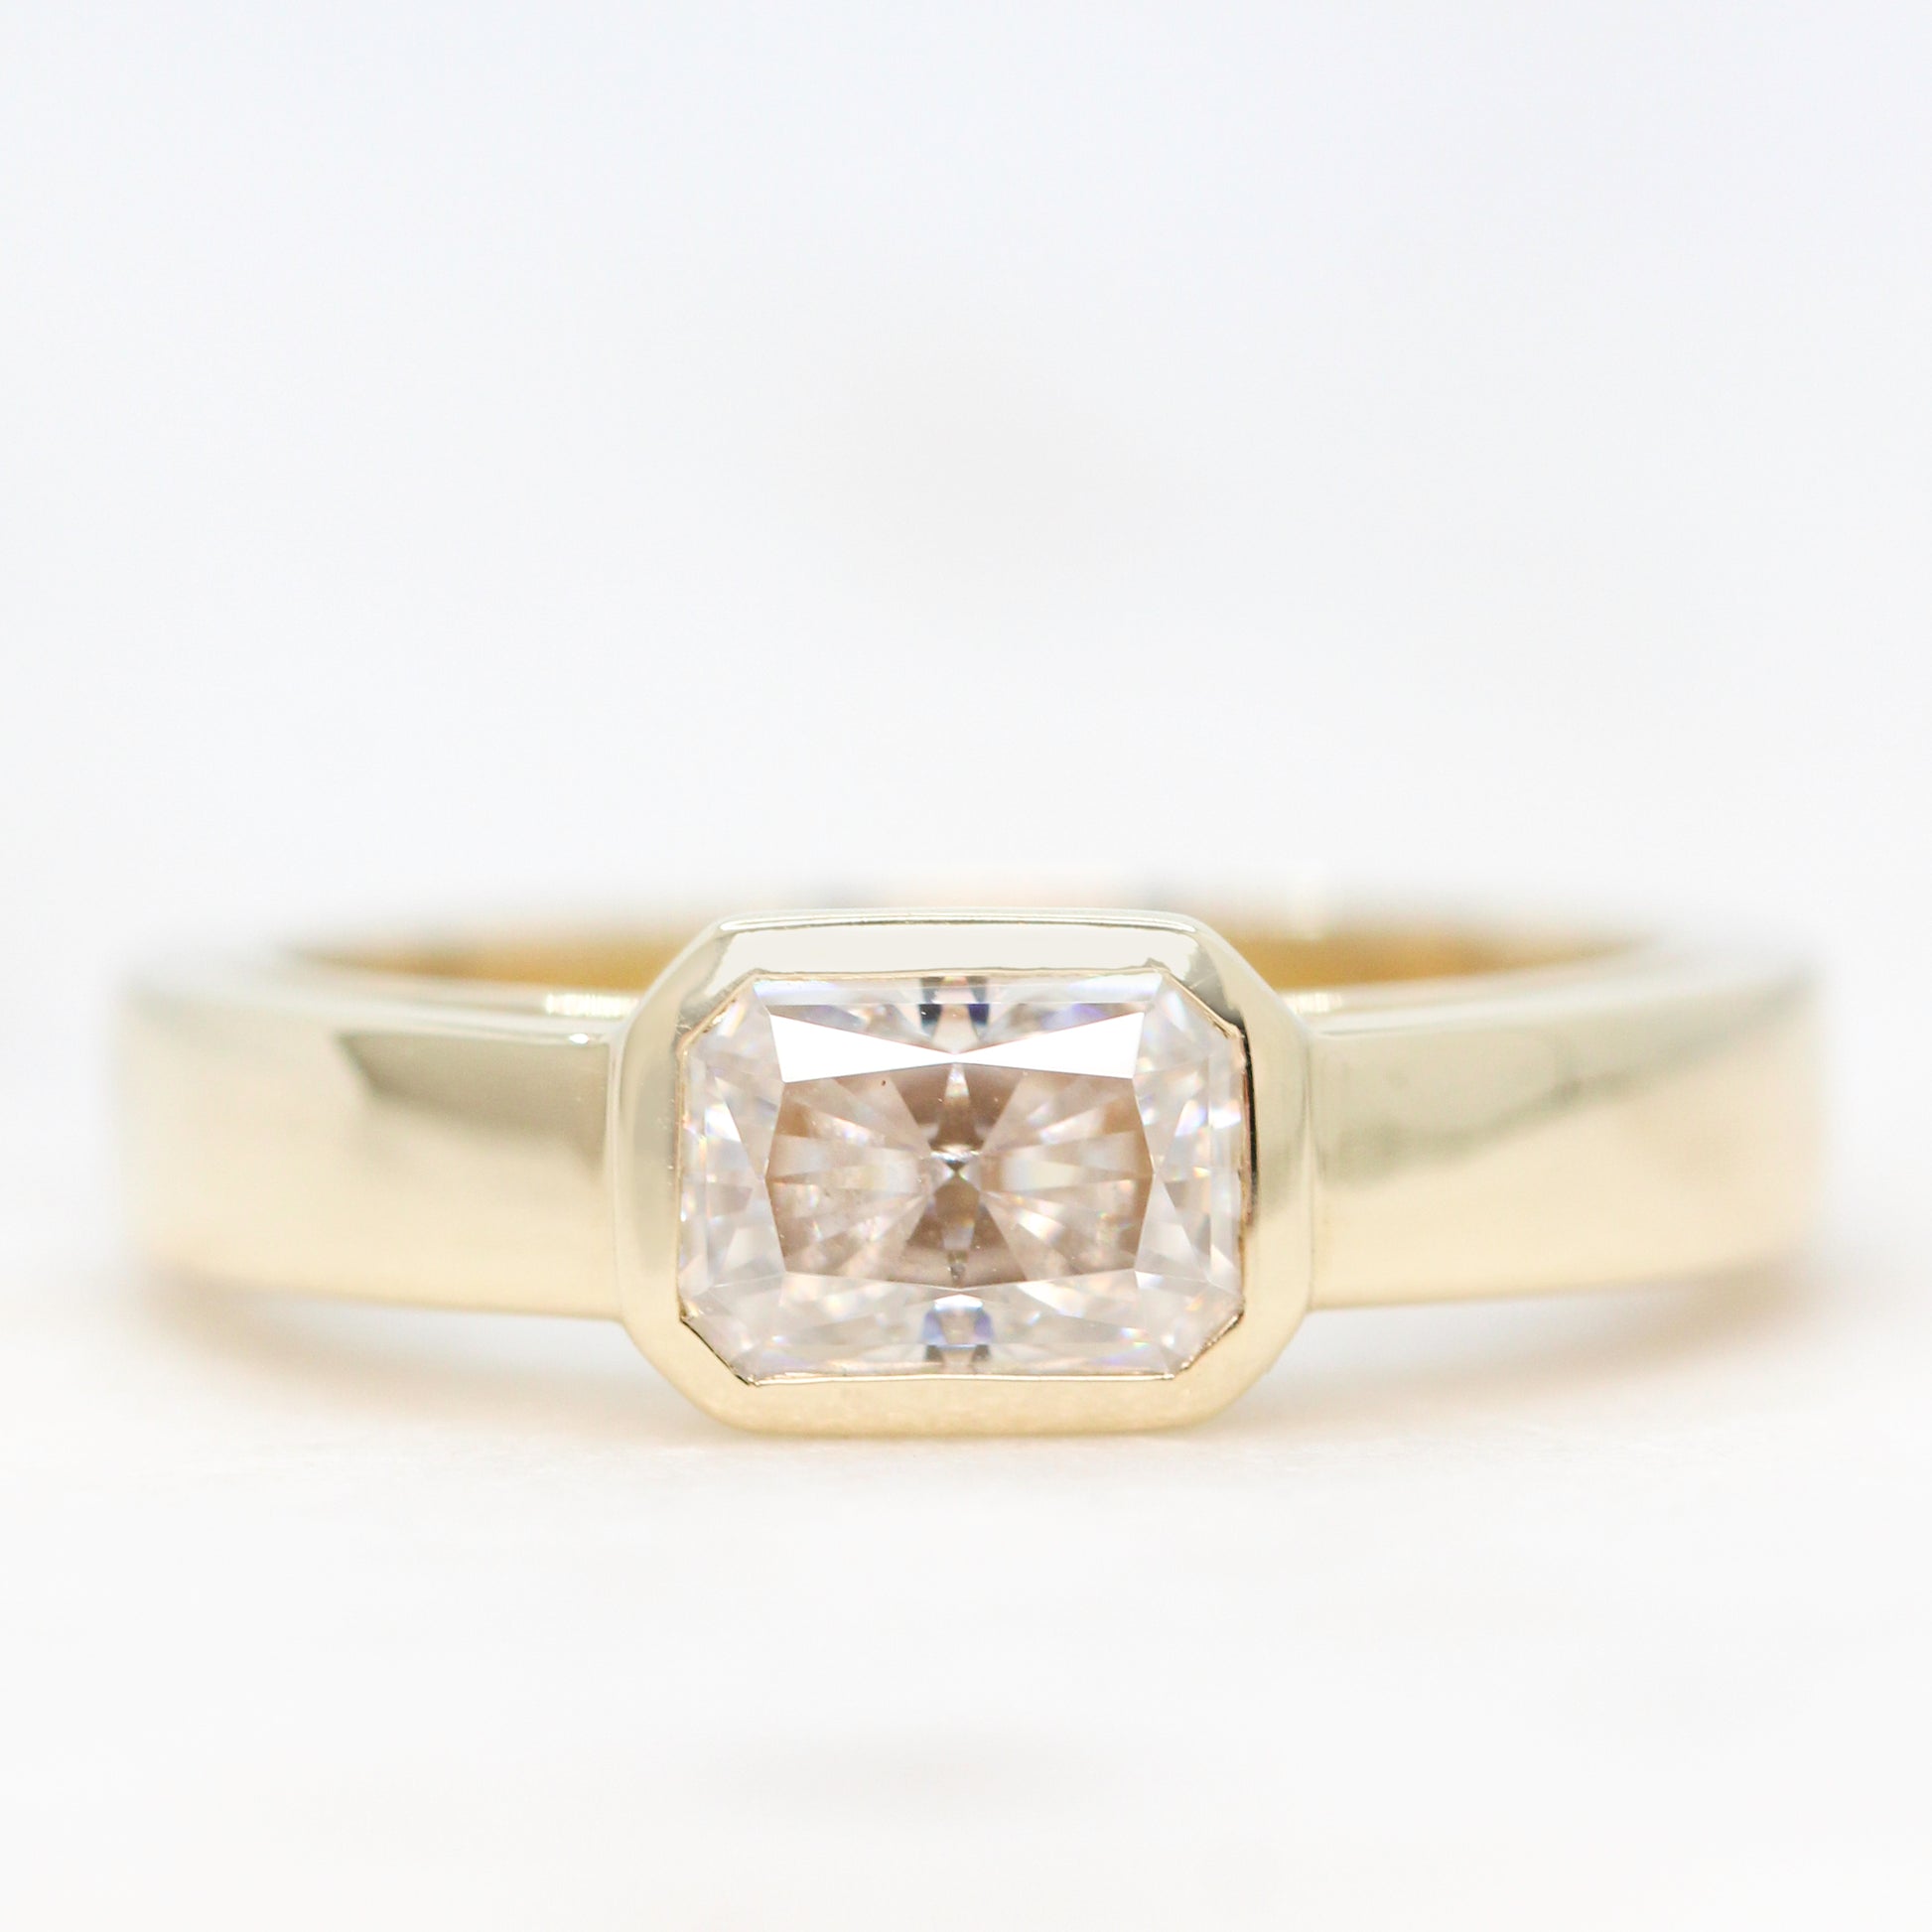 *NEED TO PHOTO BRUSHED* Mabel Ring with a 1.00 Carat Radiant Cut Moissanite - Made to Order, Choose Your Gold Tone - Midwinter Co. Alternative Bridal Rings and Modern Fine Jewelry